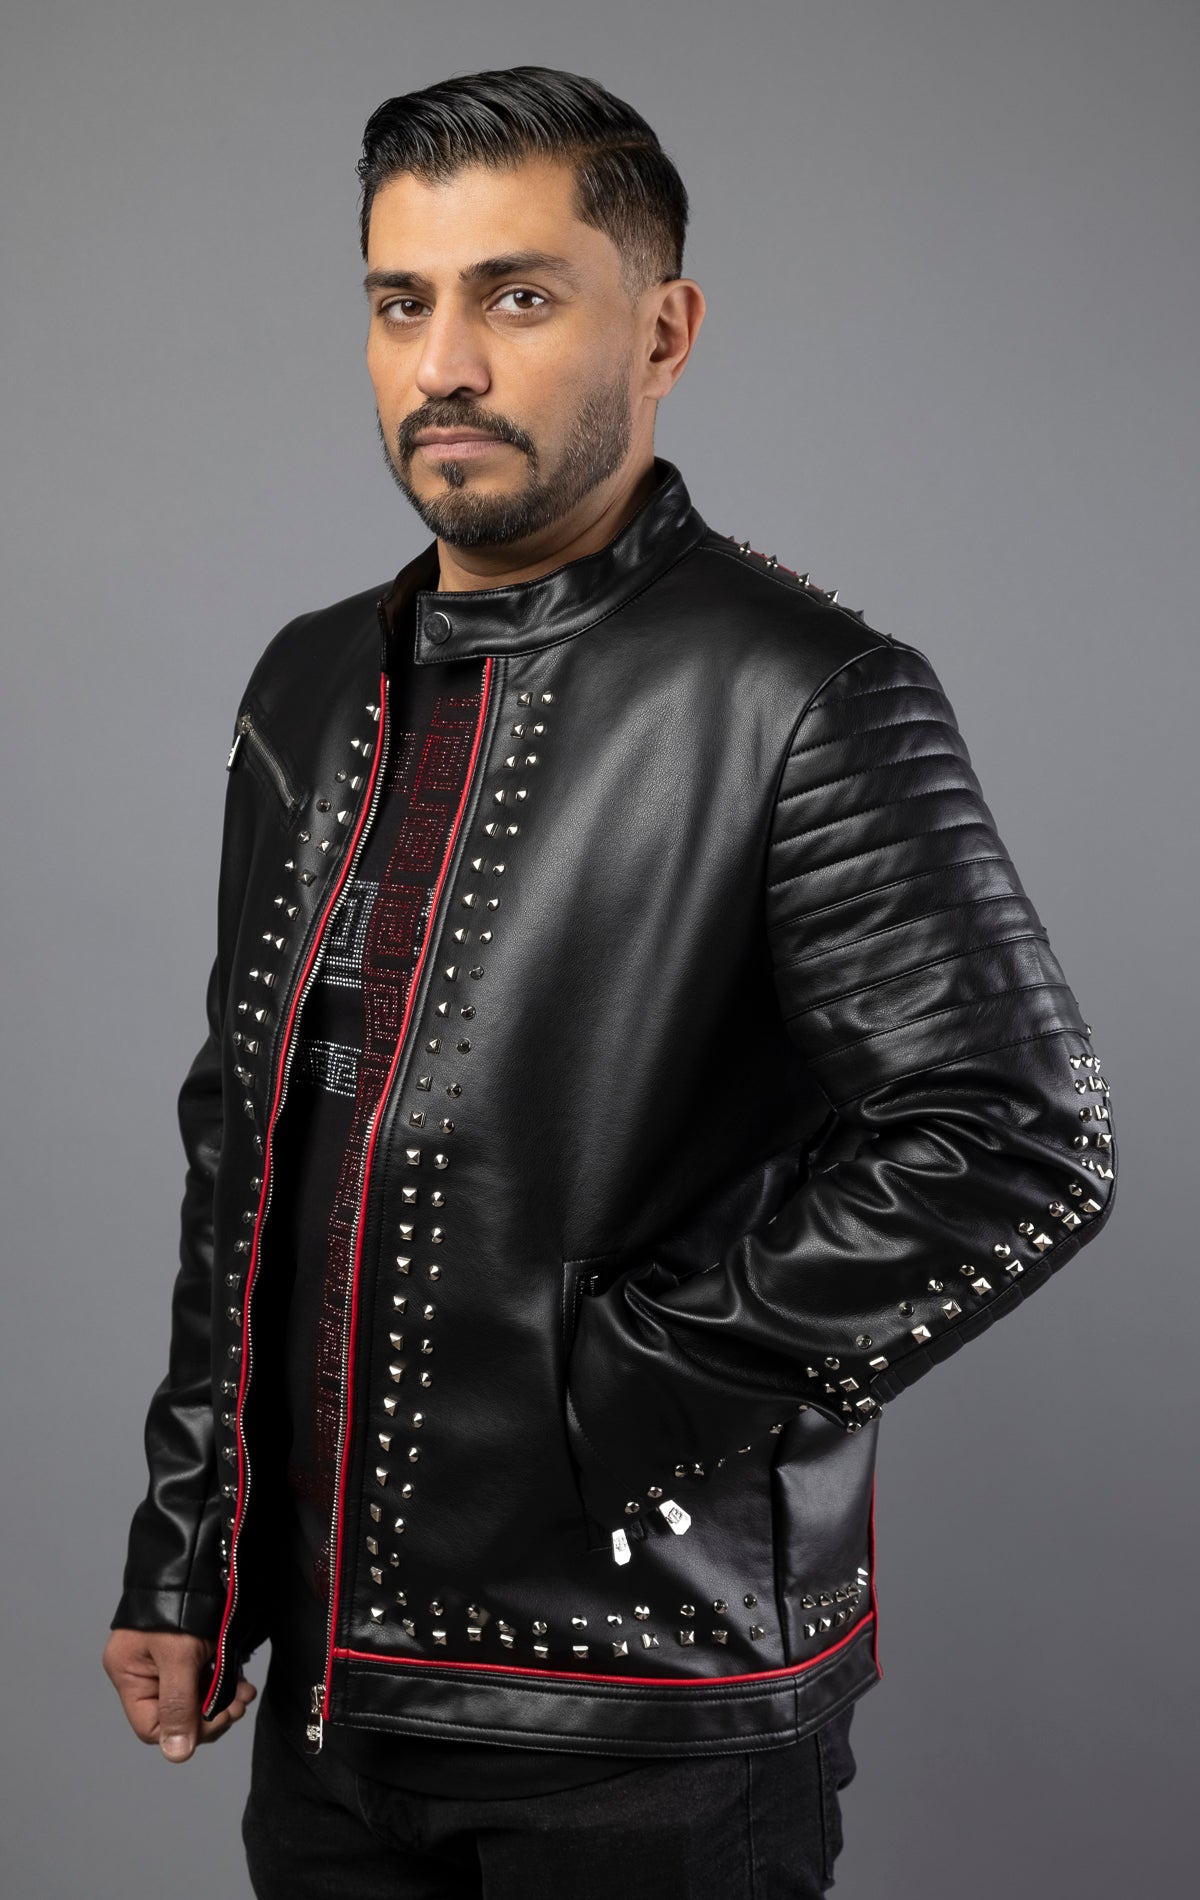 This leather jacket features red piping and intricate embroidery patches, as well as top-quality silver studs. Made with soft, genuine cowhide leather, this rock punk style jacket includes two side pockets. Color: black.